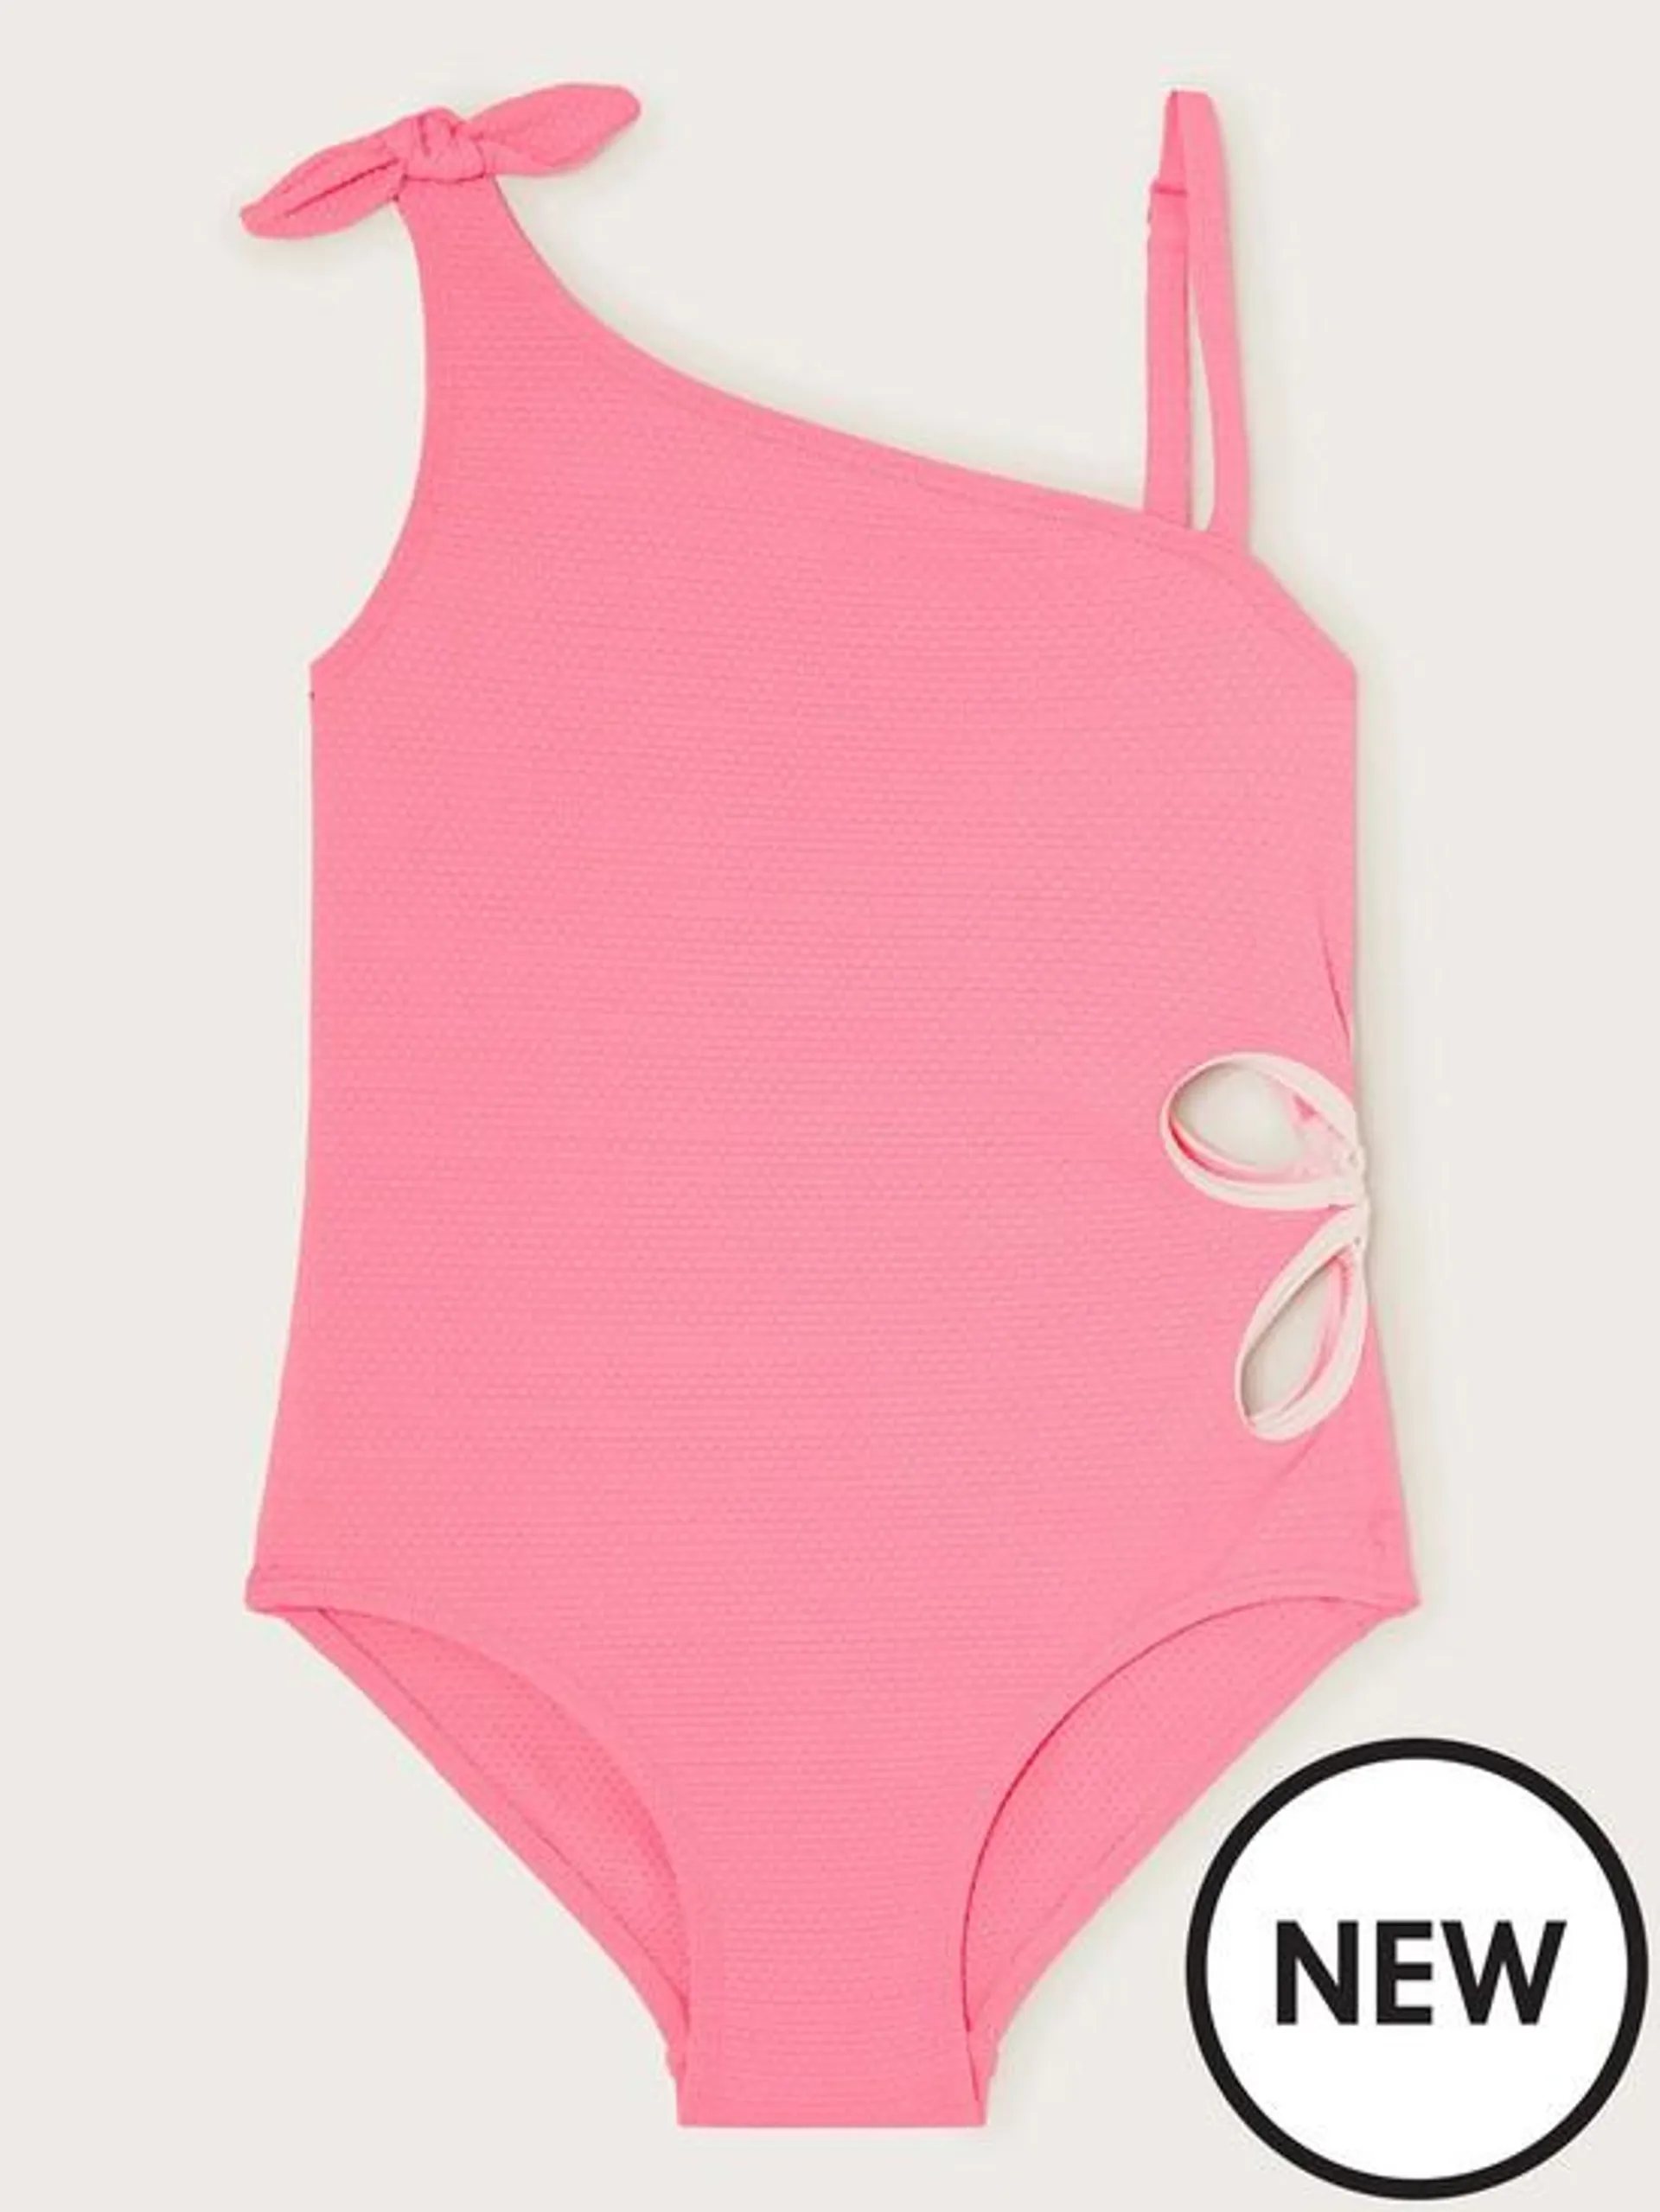 Girls Floral Cut Out Swimsuit - Pink